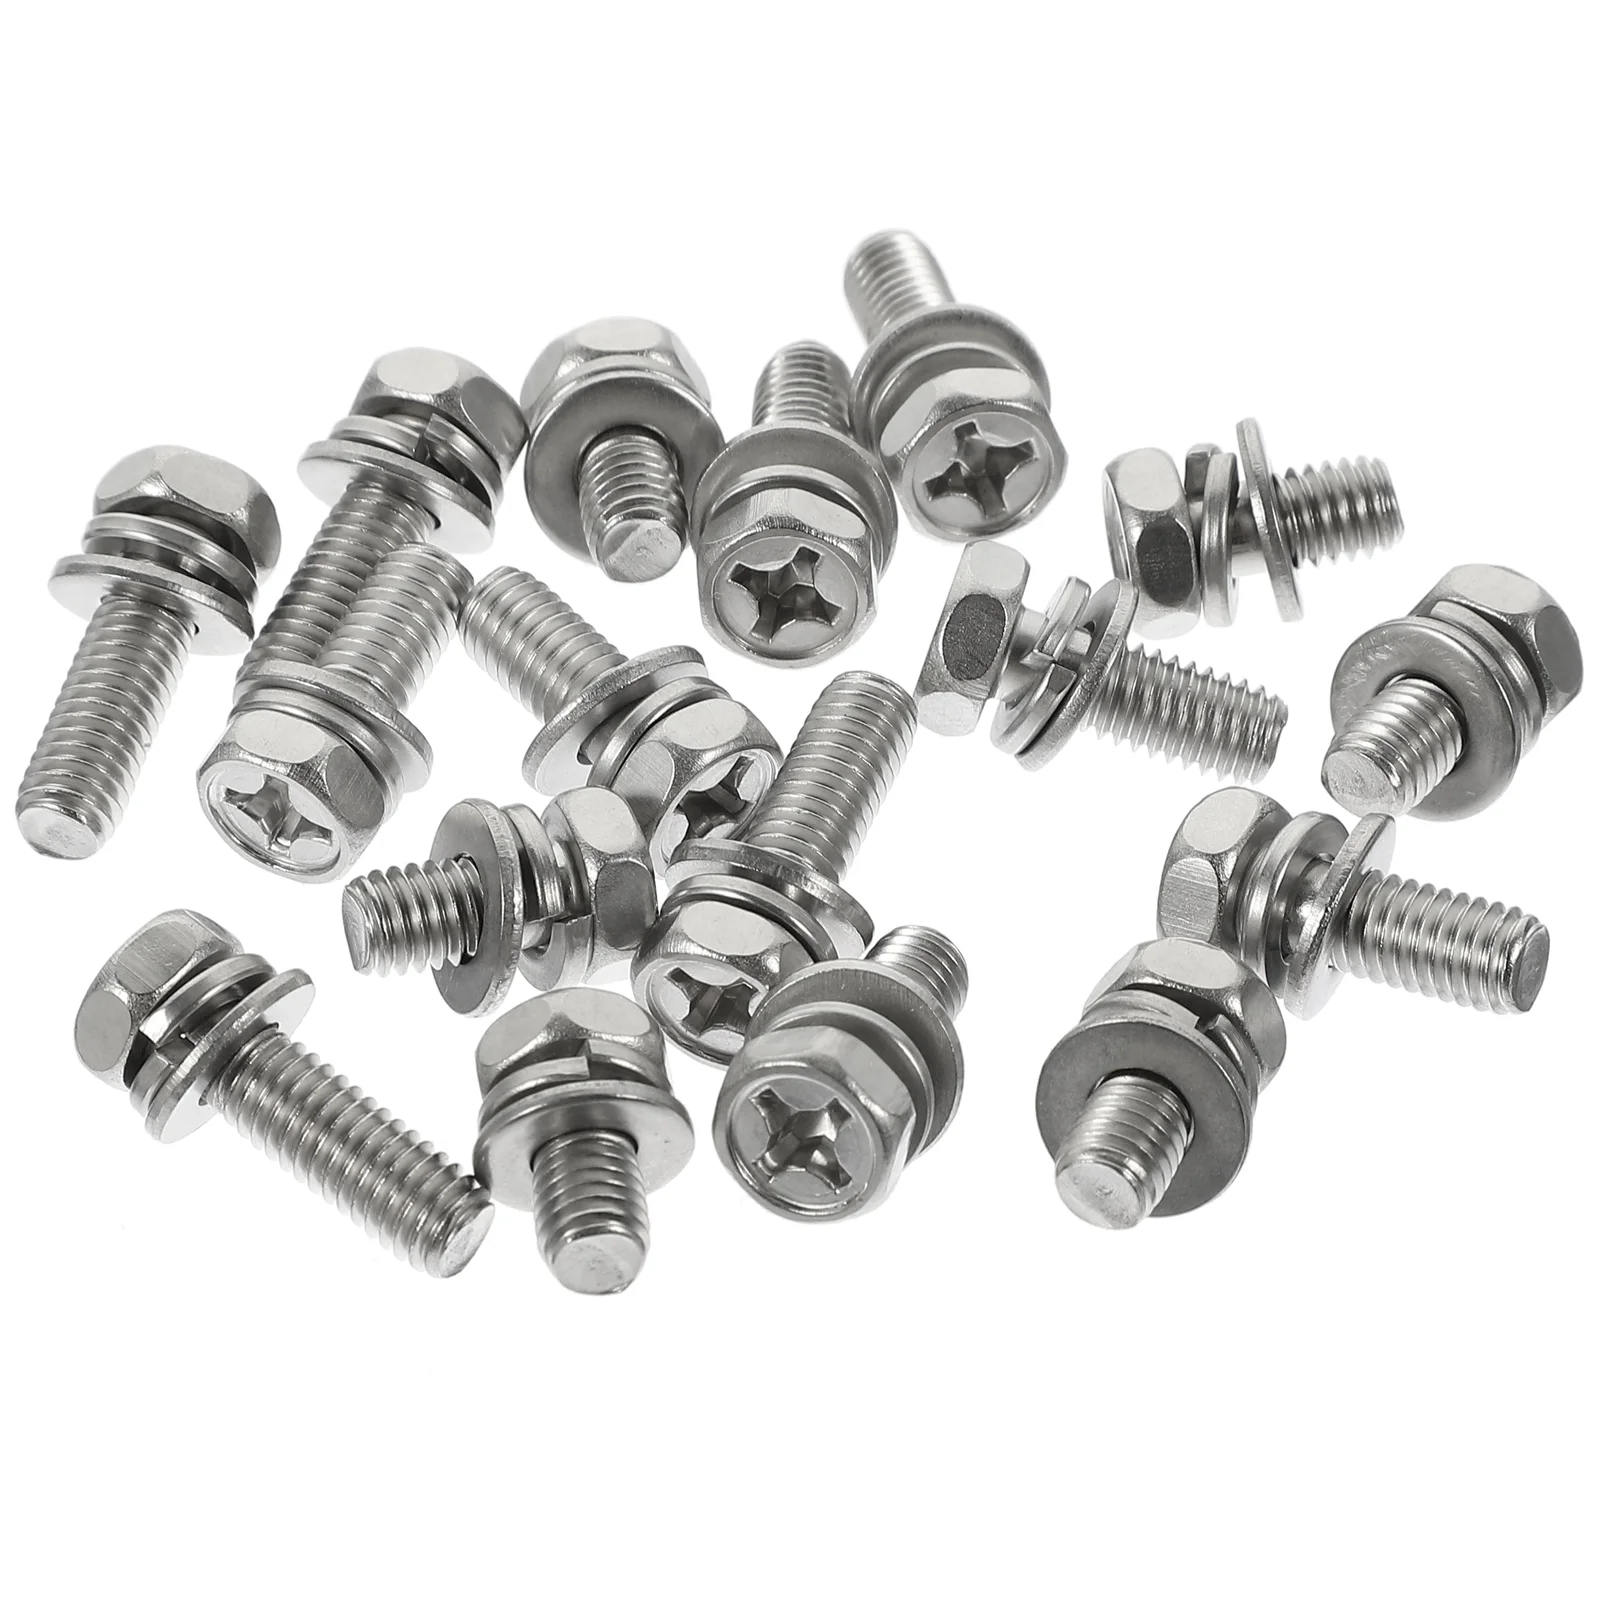 

18 Pcs Motorcycle Bolt Screws and Nuts Bolts Cross Groove Hexagon Stainless Steel Terminal